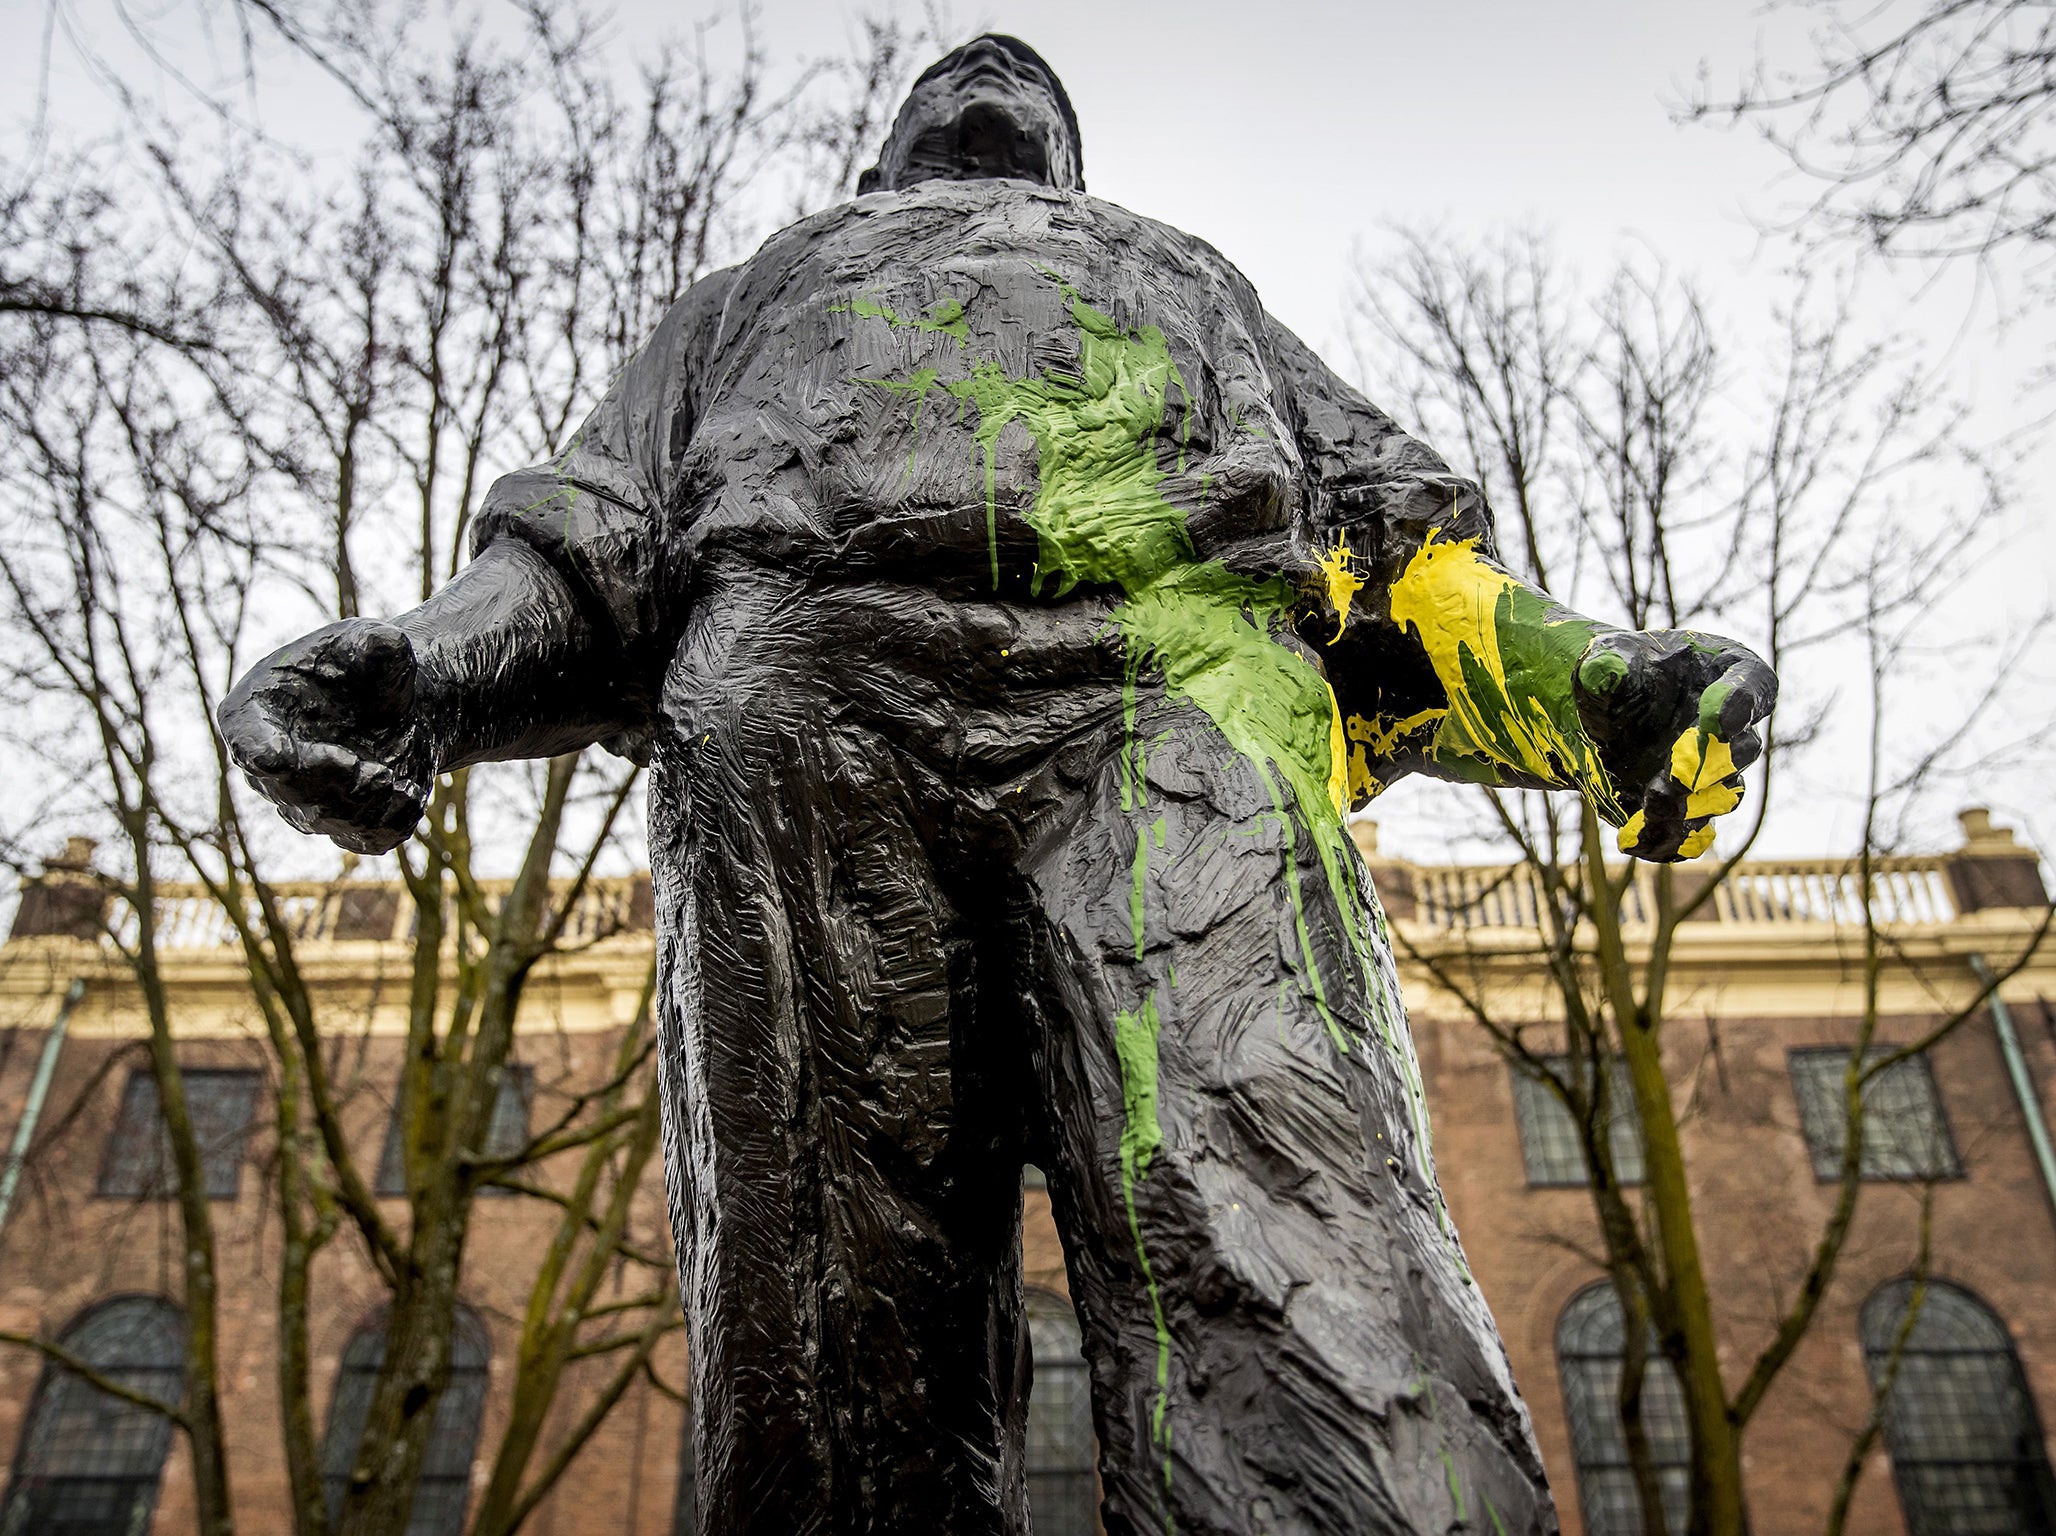 Amsterdam's famous De dokwerker statue covered in paint